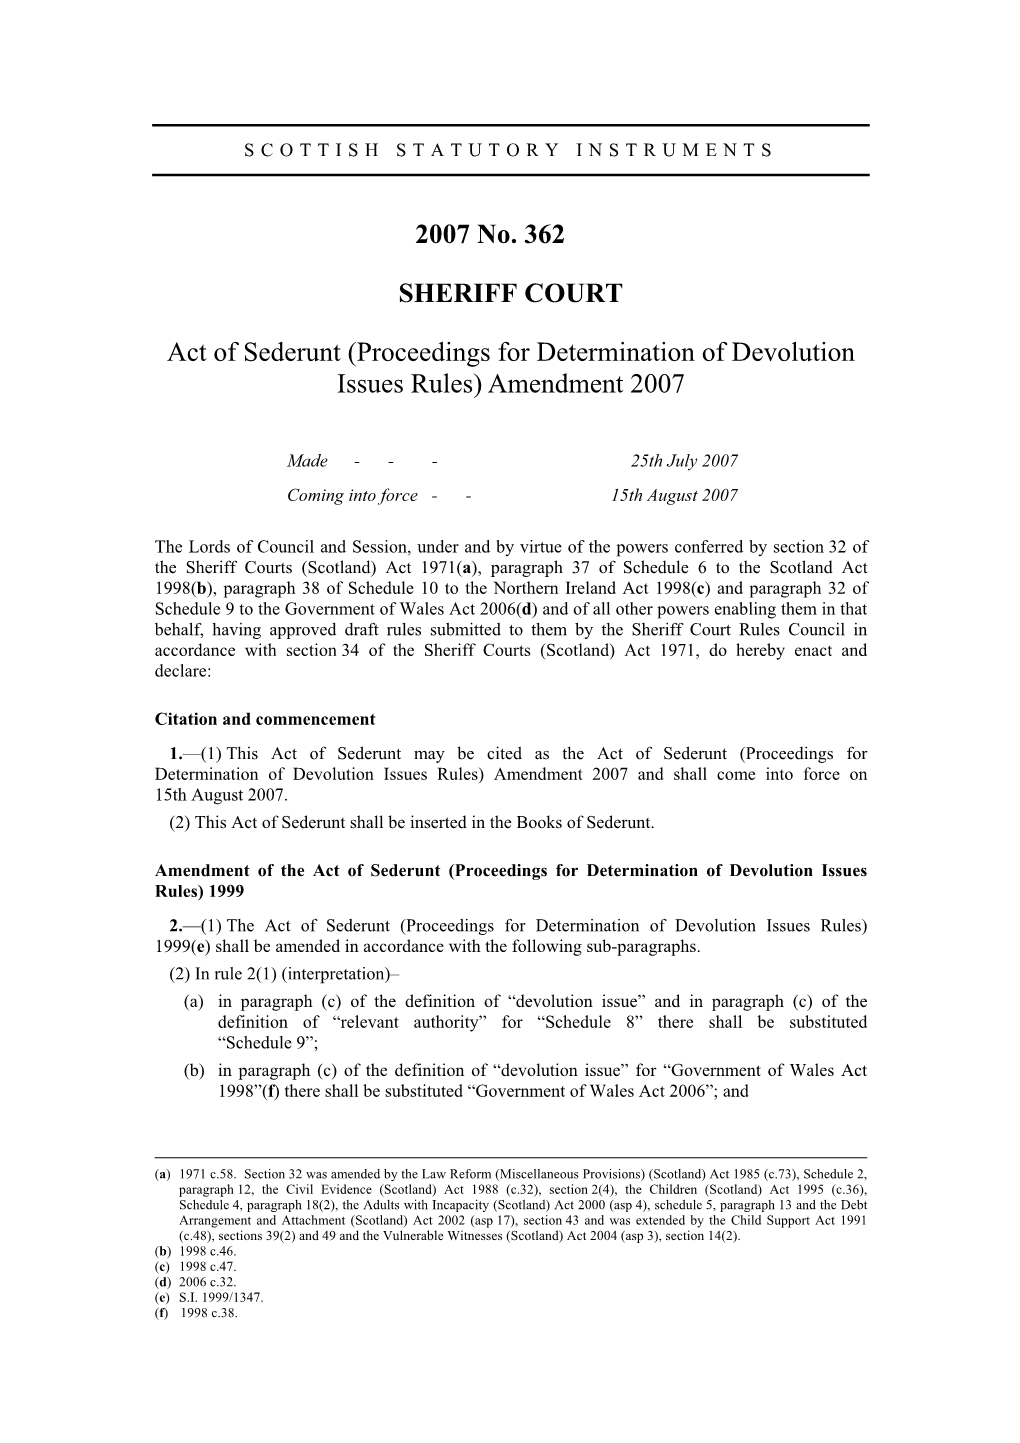 2007 No. 362 SHERIFF COURT Act of Sederunt (Proceedings For